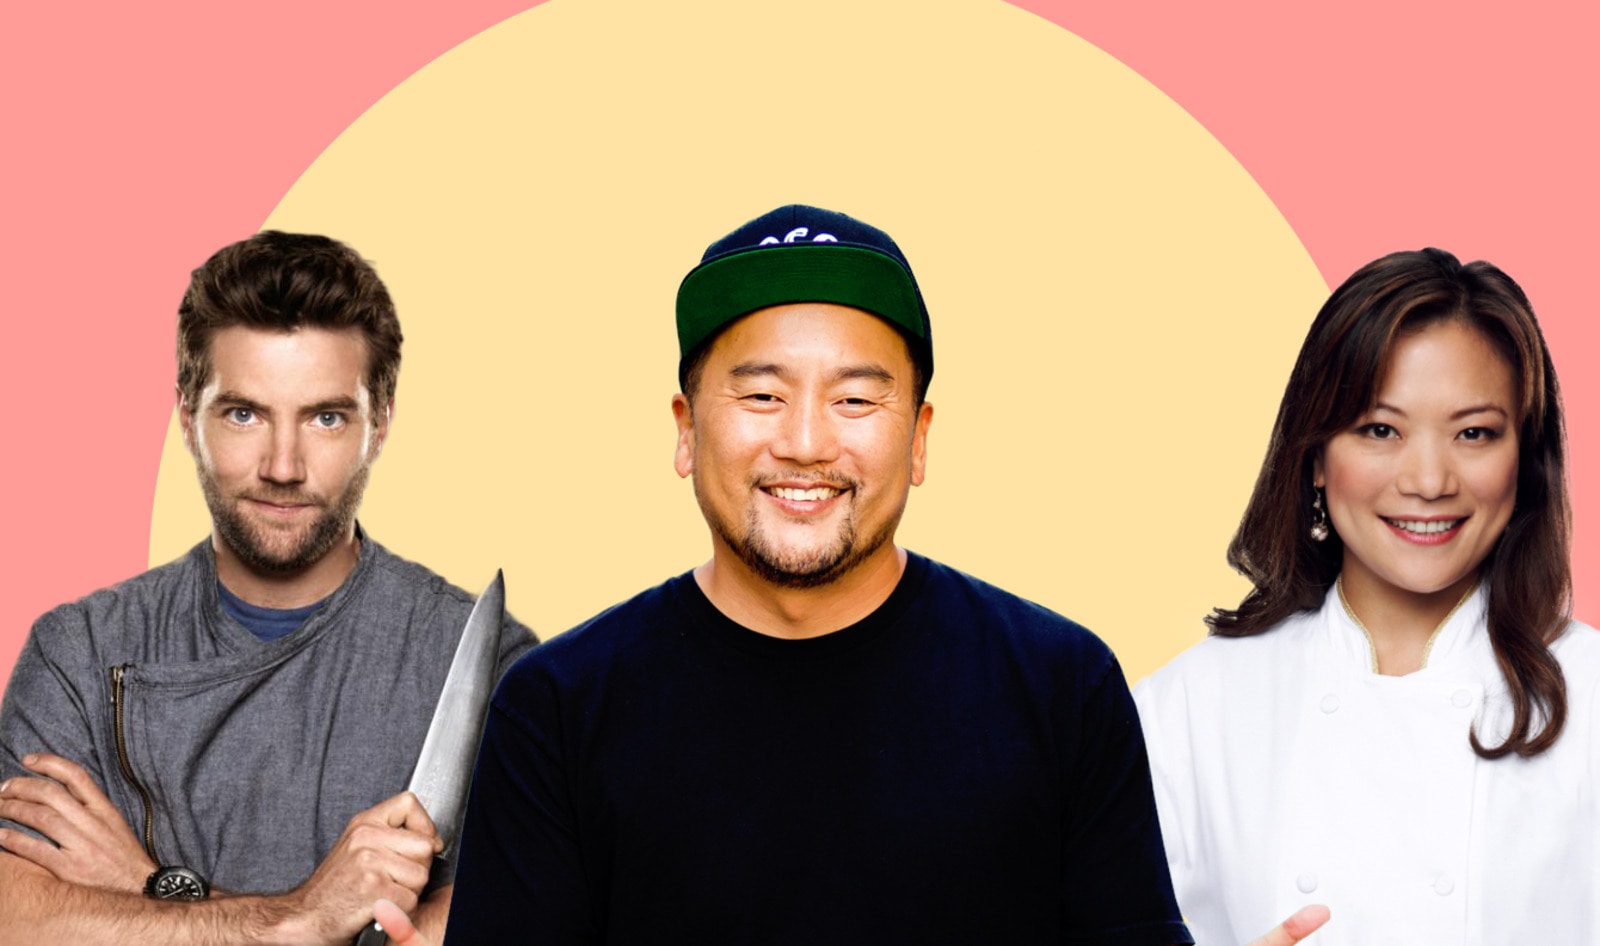 What Roy Choi, Top Chef Alumni, and Other Celebrity Chefs Have Planned for This Year's "Vegan Coachella"